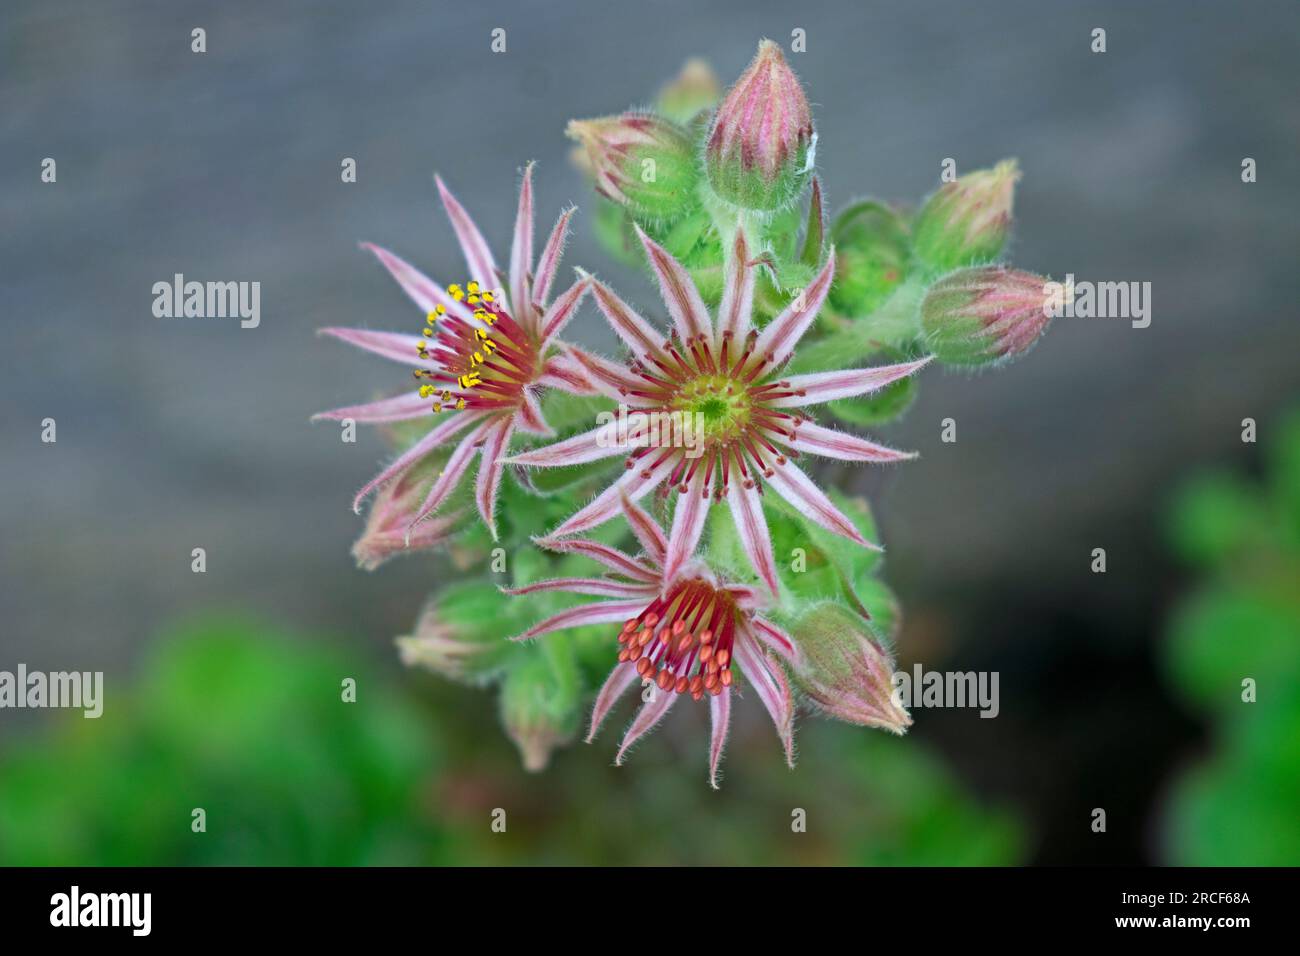 Flowers and buds of the sempervivum tectorum (hens and chicks) plant on a blurred green and black background -02 Stock Photo